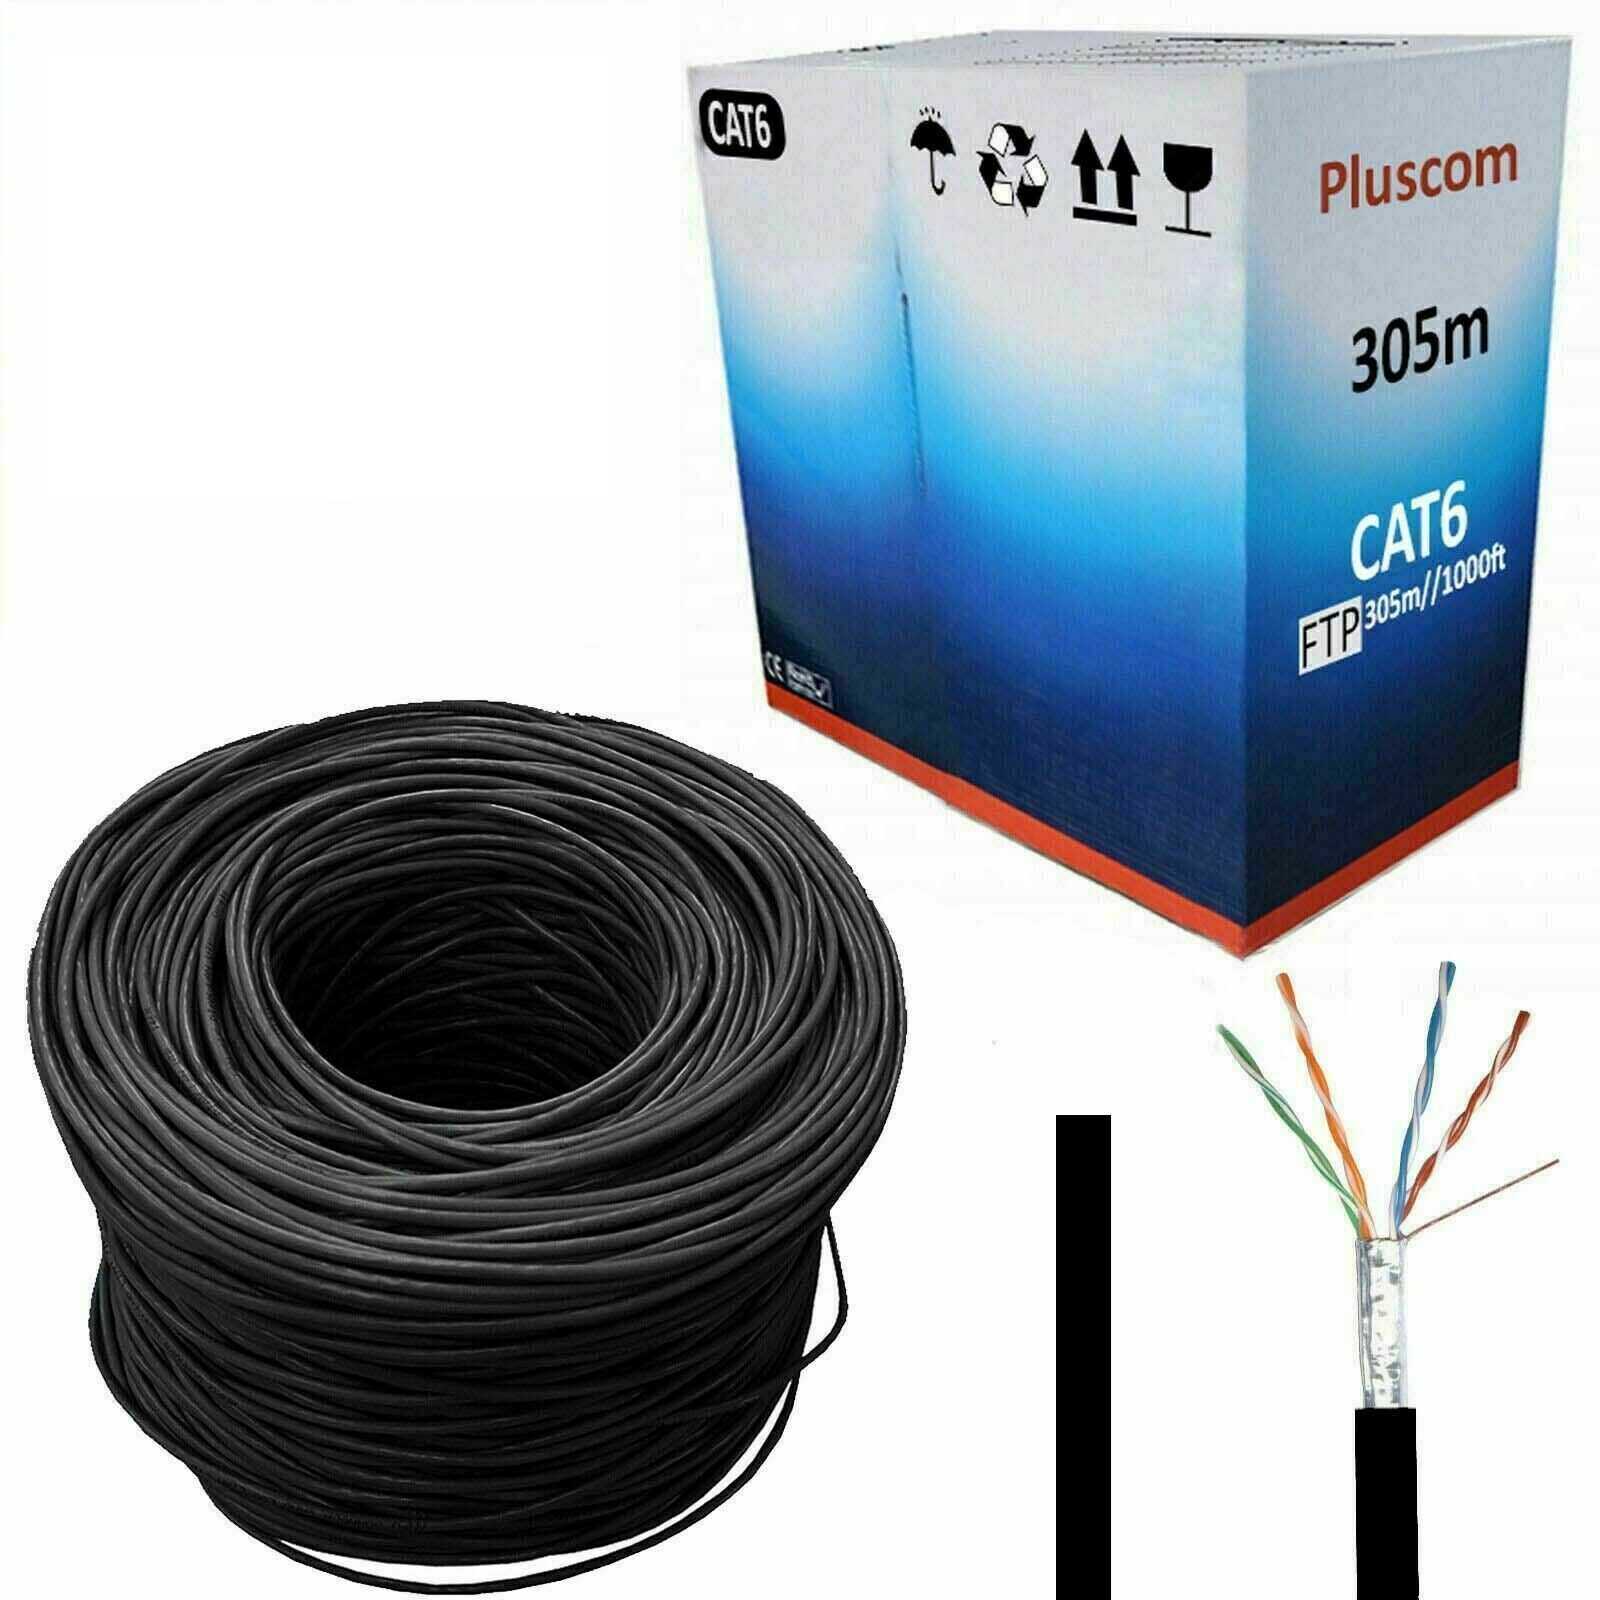 Black 305M Rj45 Cat6 Outdoor Network Ethernet Ftp Cable Roll 4 Pair Adsl Modem Reel Box